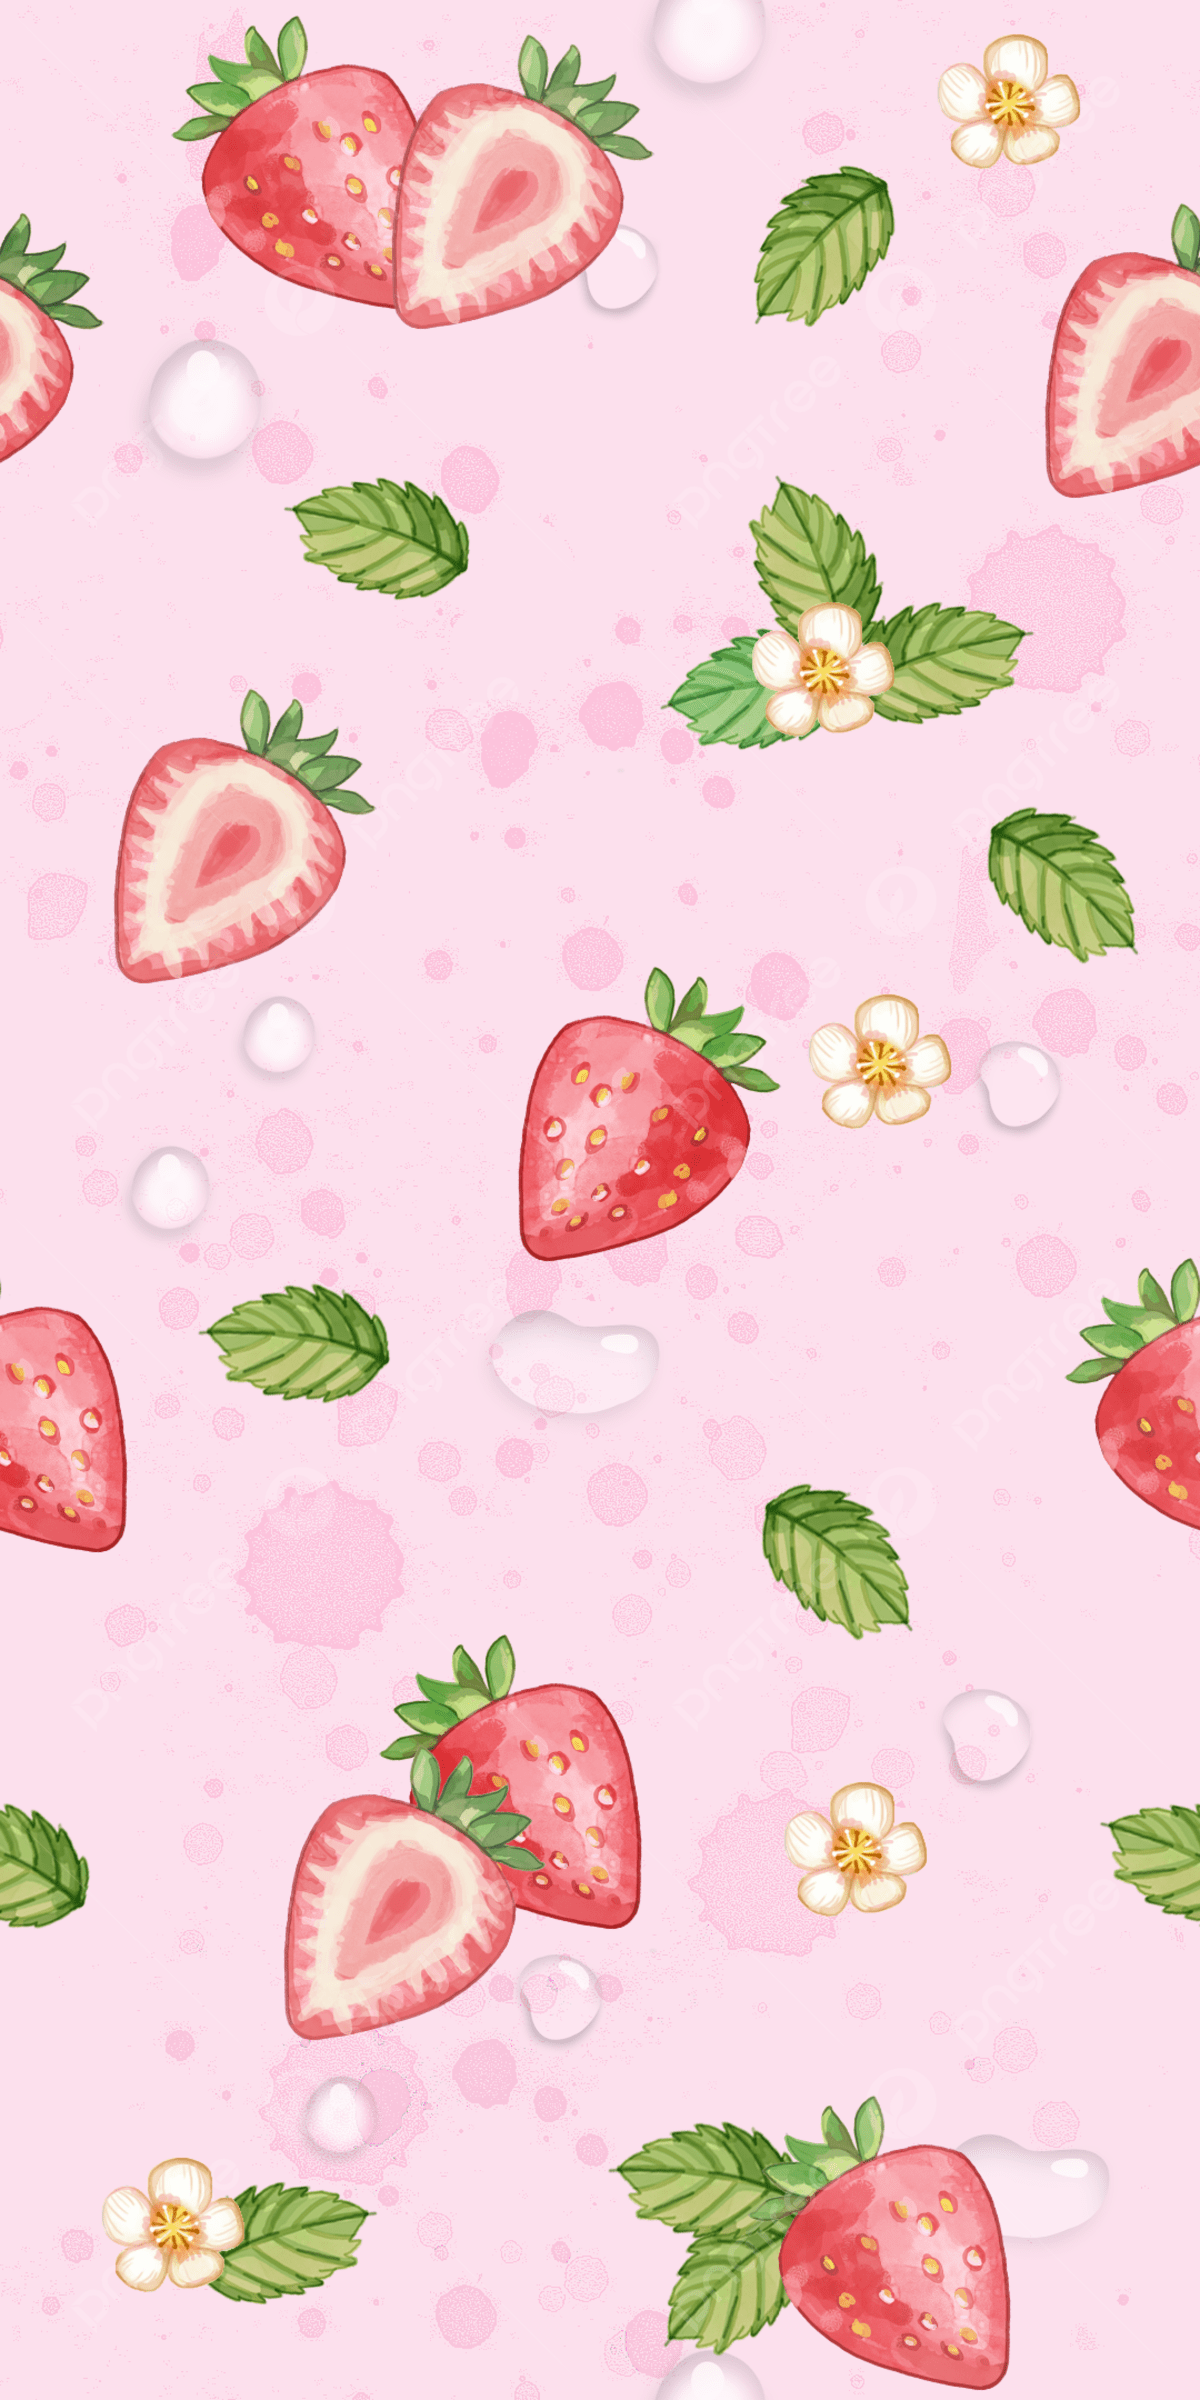 Strawberries Background Image, HD Picture and Wallpaper For Free Download